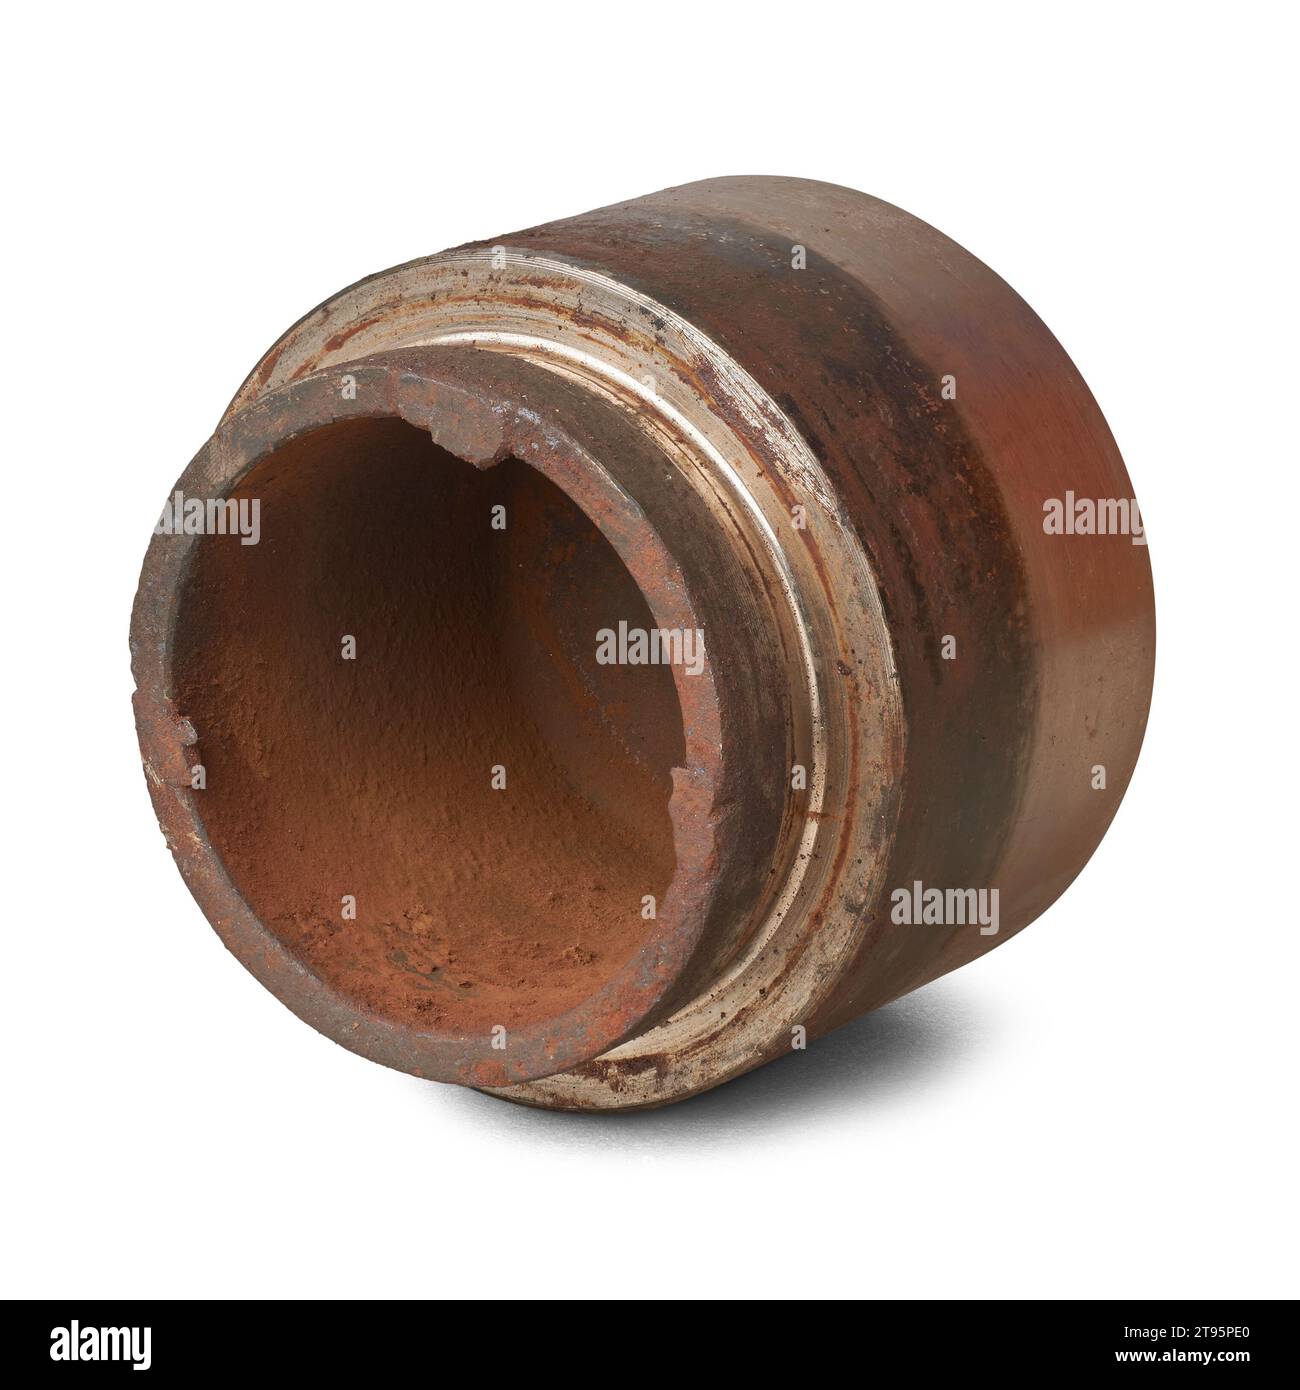 close-up of old disc brake caliper piston, rusty and worn out components in the car hydraulic braking system, regular inspection and maintenance Stock Photo